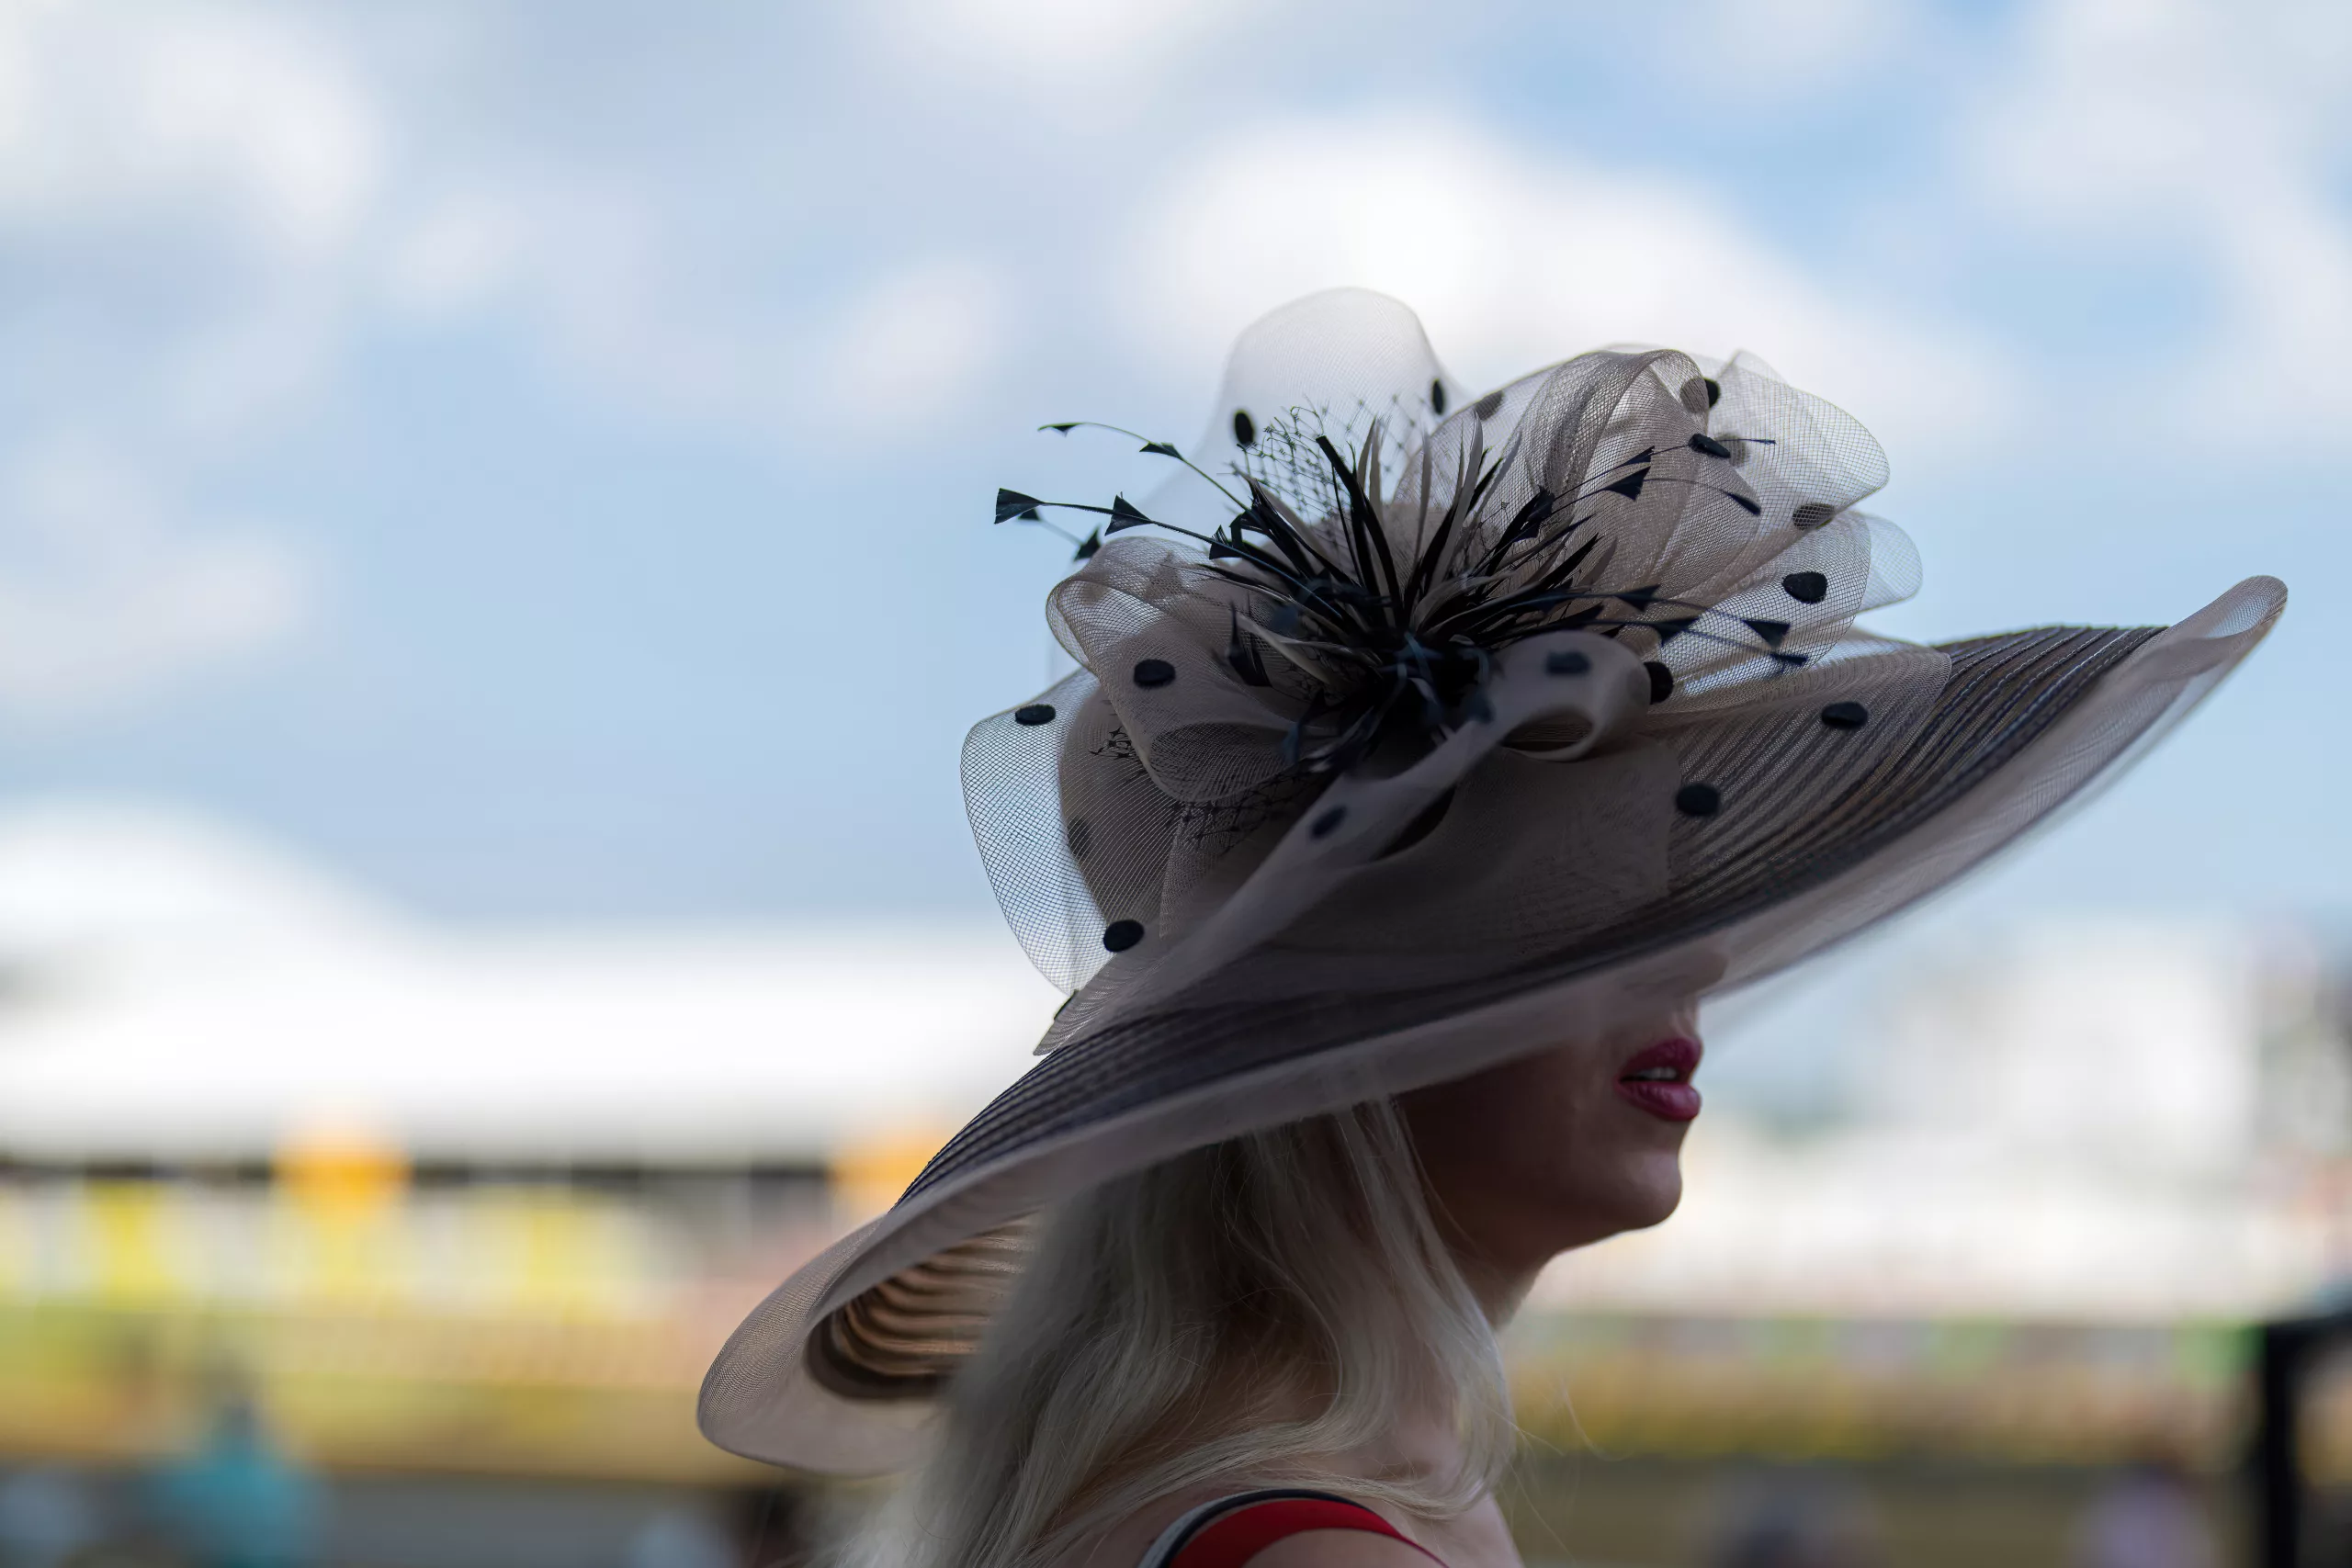 First Lady Beshear warns of uptick in human trafficking during KY Derby festivities